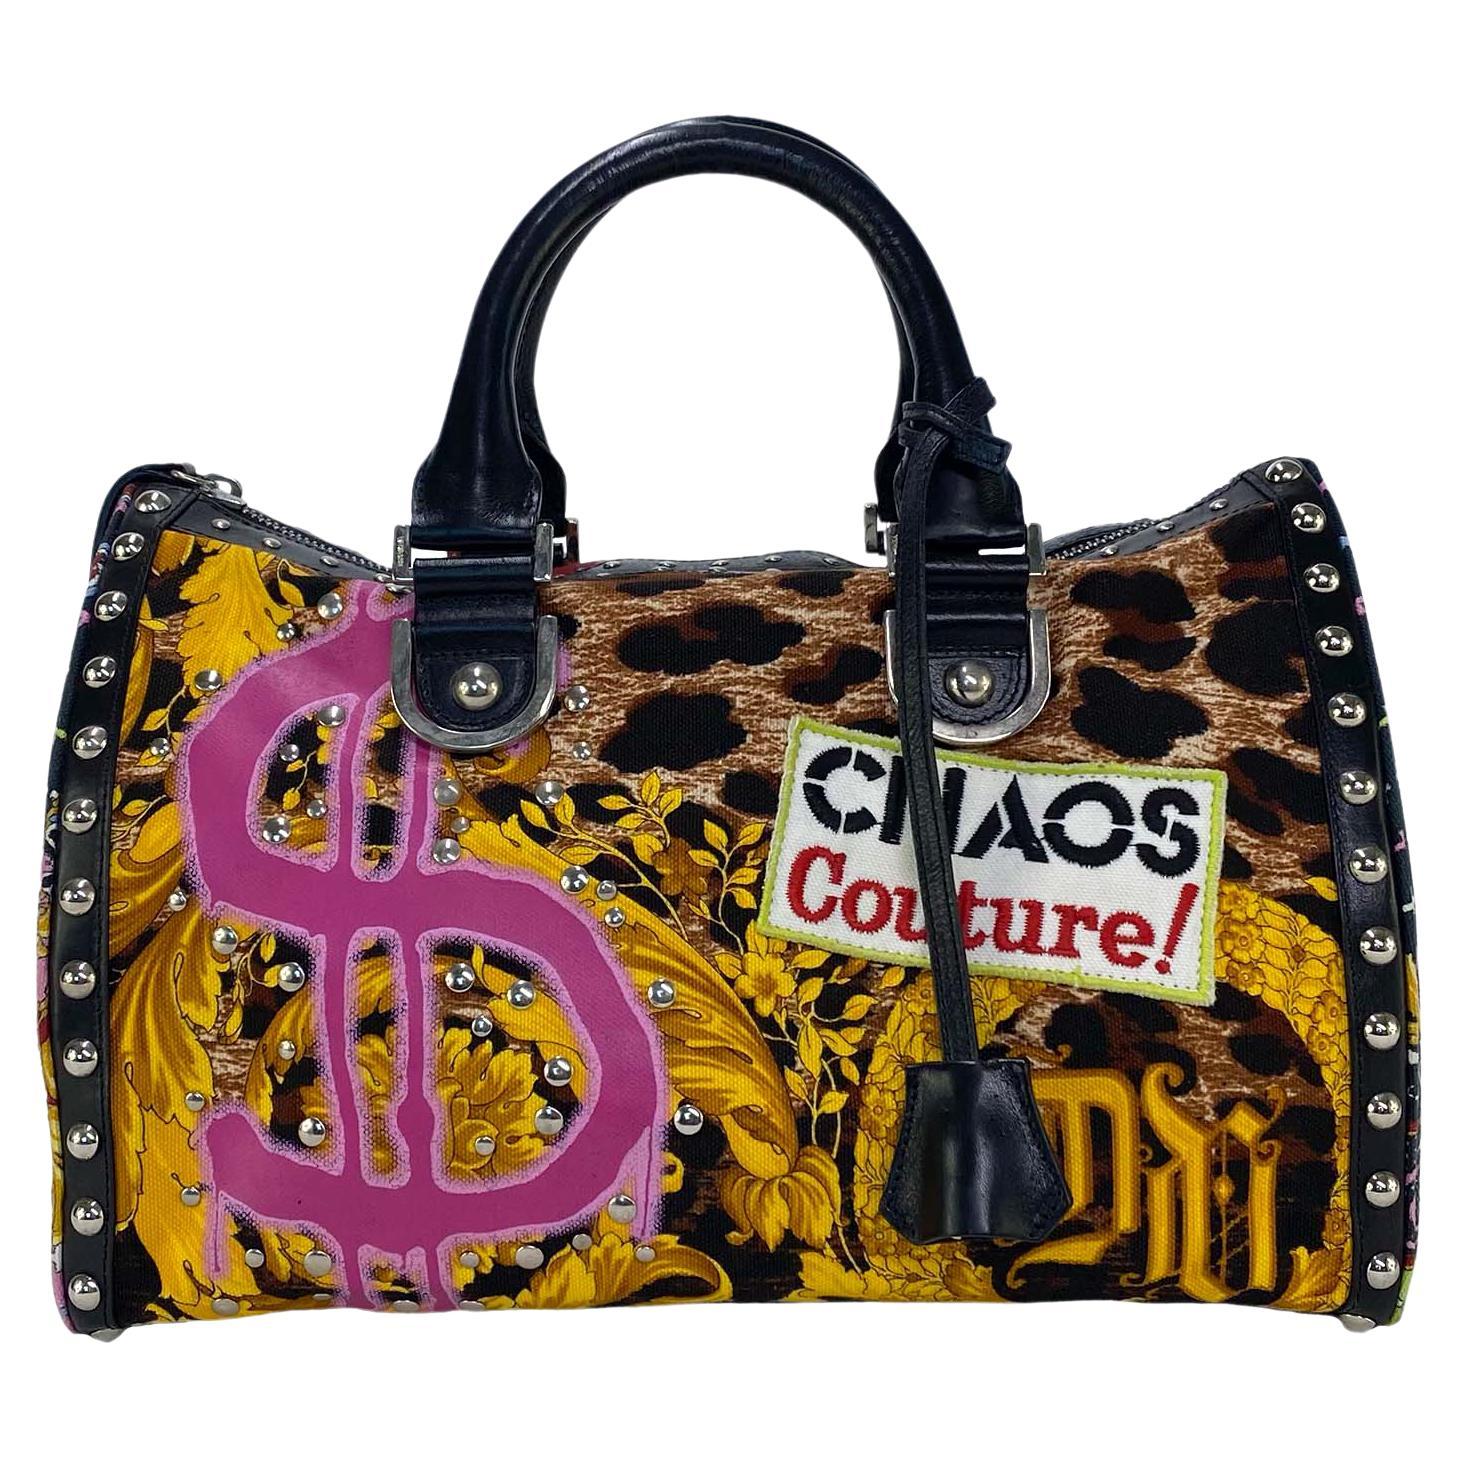 S/S 2005 Versace Chaos Couture Studded Archival Print Boston Bag Runway For Sale